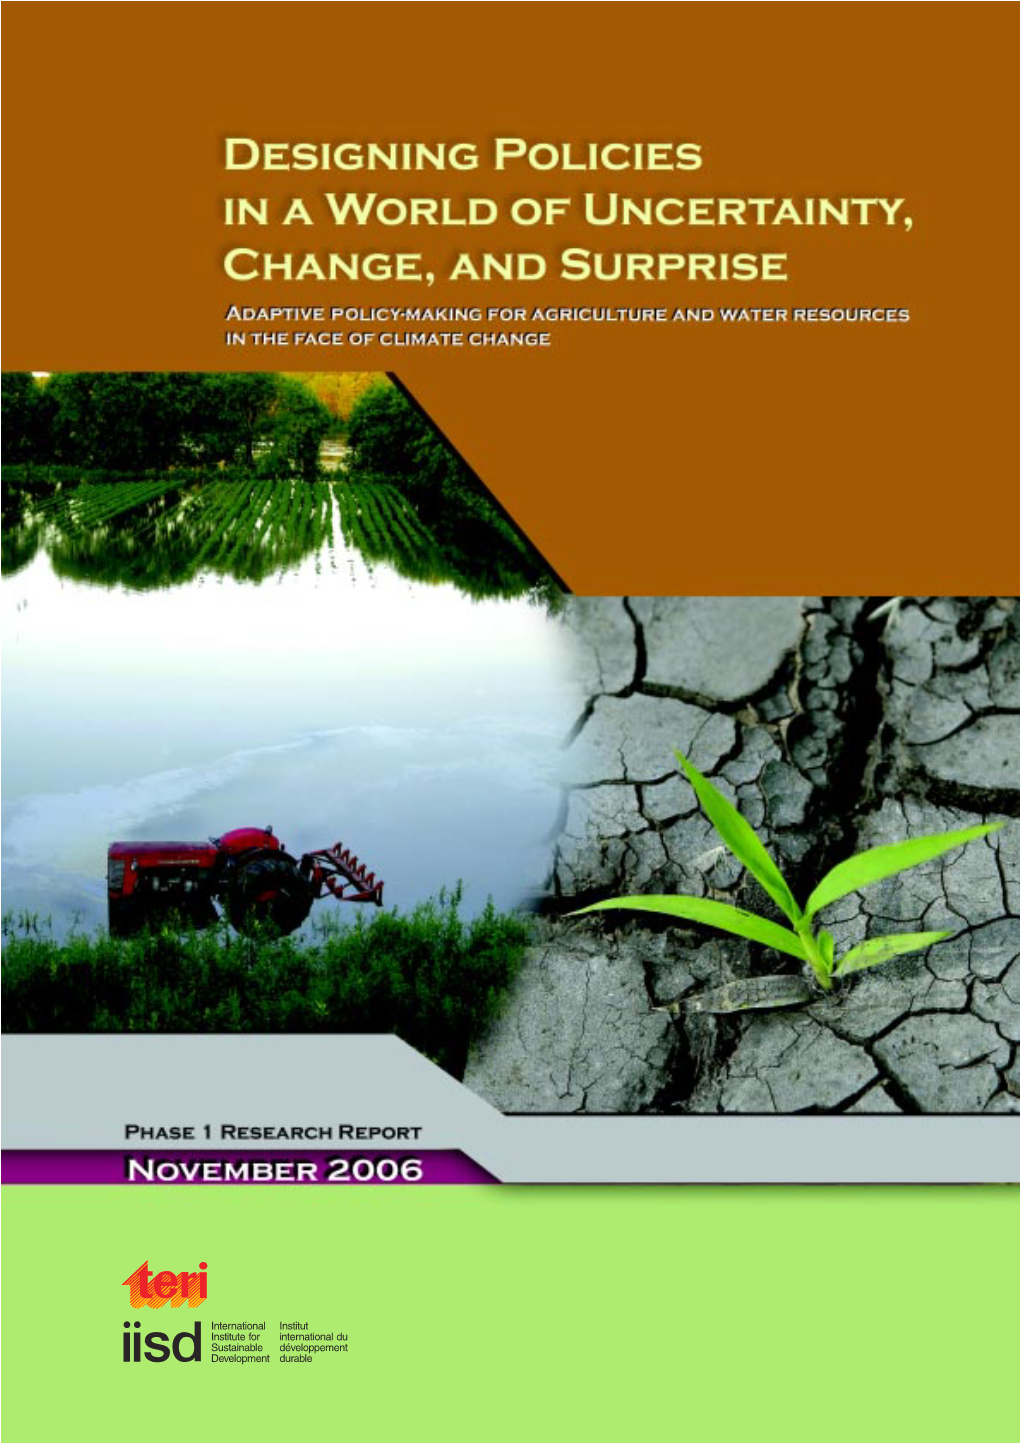 Designing Policies in a World of Uncertainty, Change and Surprise – Adaptive Policymaking for Agriculture and Water Resources